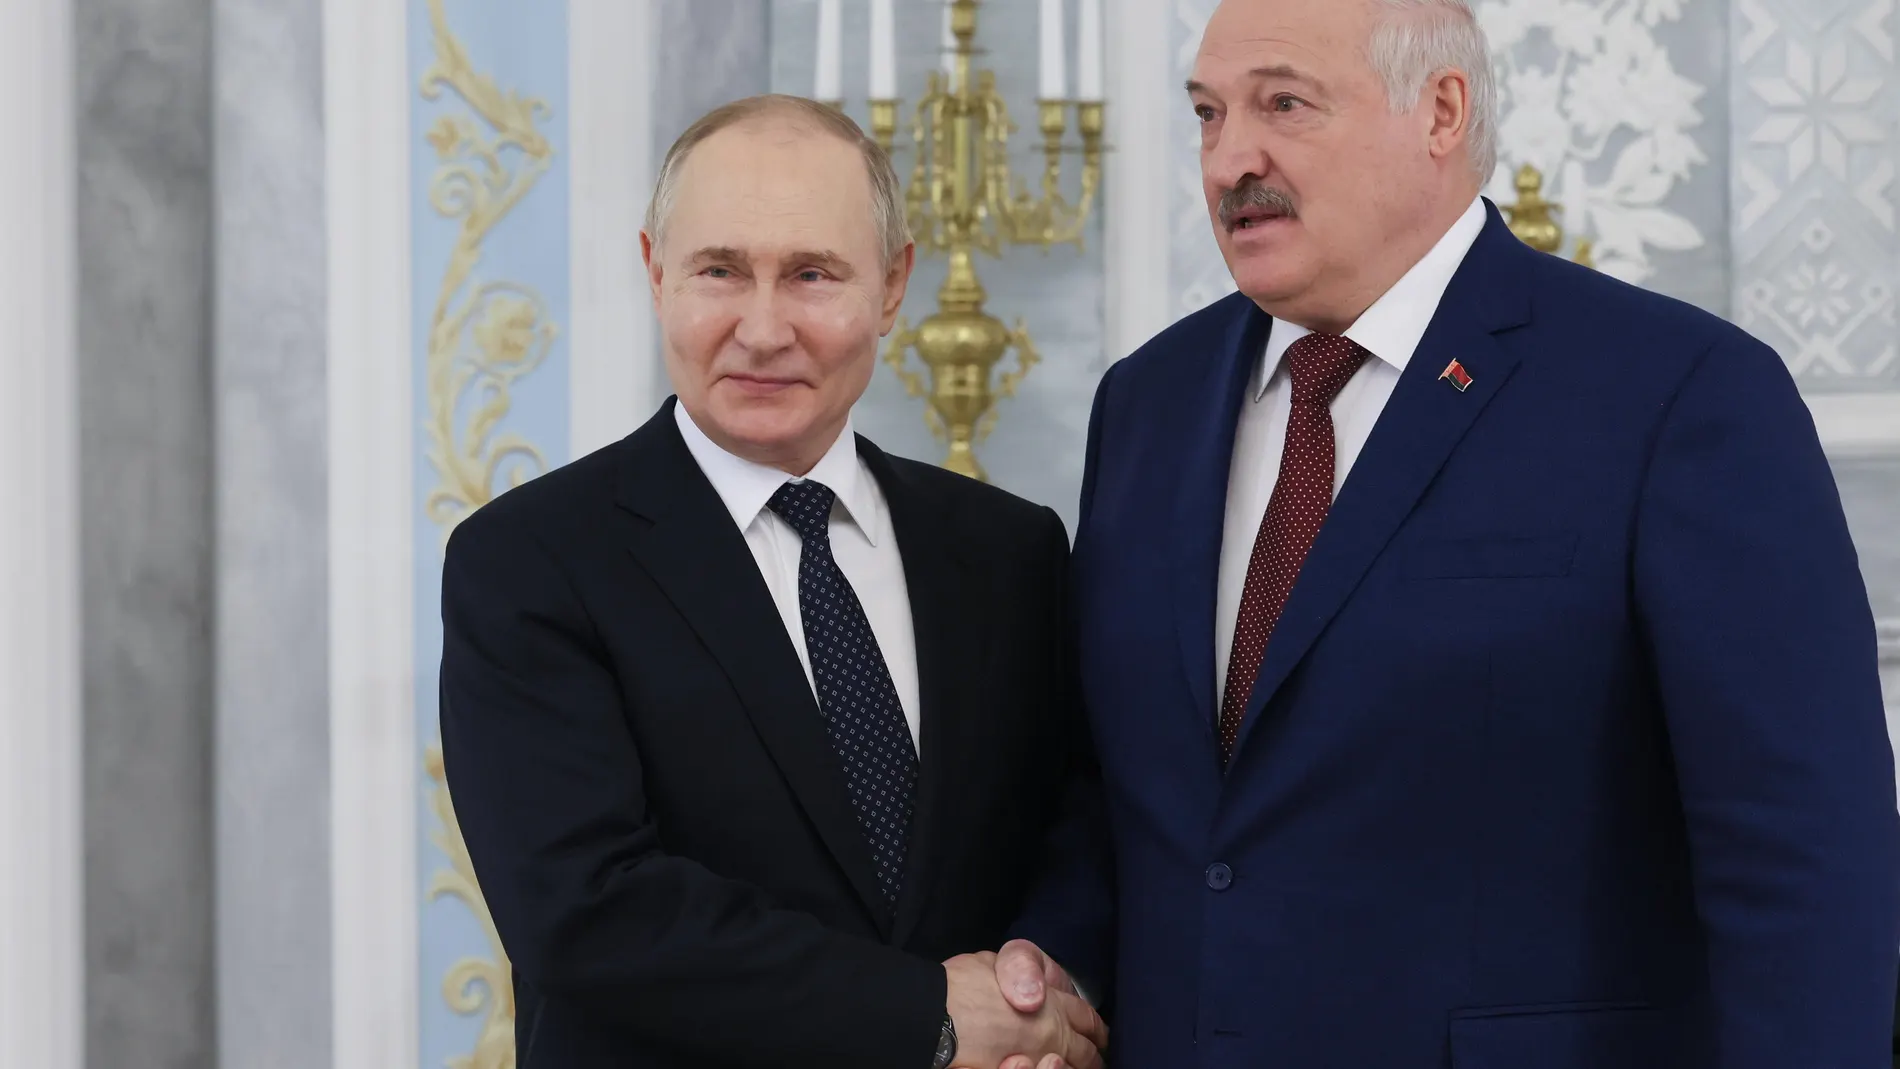 Minsk (Belarus), 23/05/2024.- Russian President Vladimir Putin (L) and Belarusian President Alexander Lukashenko attend a meeting at the Palace of Independence in Minsk, Belarus, 24 May 2024. Vladimir Putin said that during his visit to Minsk he plans to discuss security issues with his Belarusian counterpart Alexander Lukashenko, as well as the participation of the Belarusian side in exercises with non-strategic nuclear weapons. (Bielorrusia, Rusia) EFE/EPA/MIKHAIL METZEL / SPUTNIK / KREMLIN...